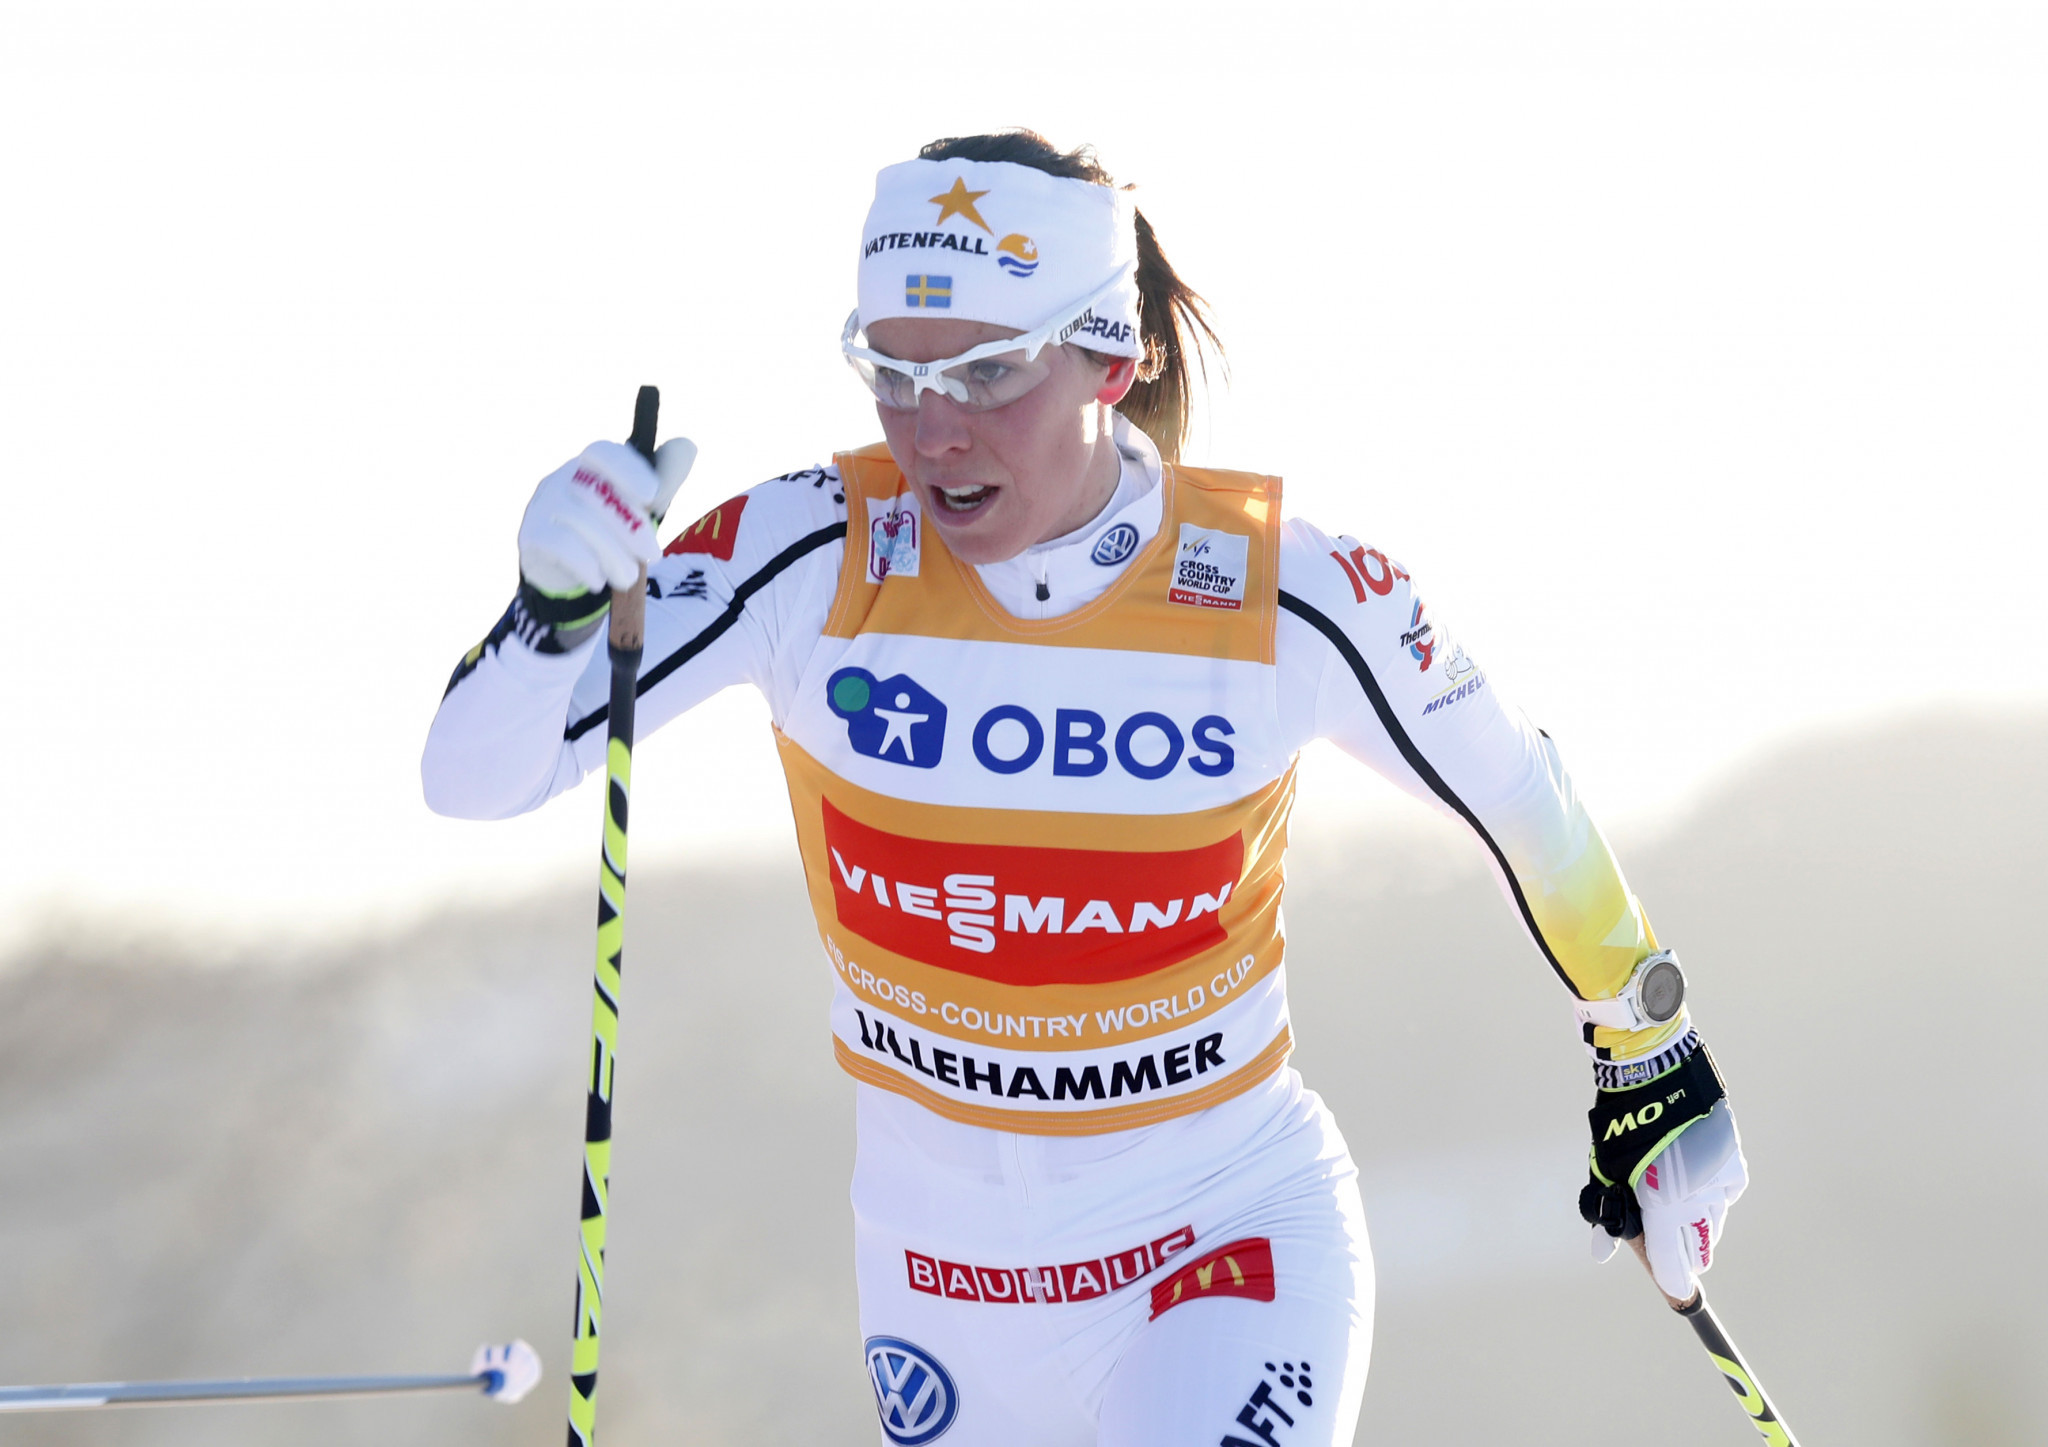 Sweden's Charlotte Kalla is currently top of the women's leaderboard at the FIS Cross-Country Ski World Cup ©Getty Images